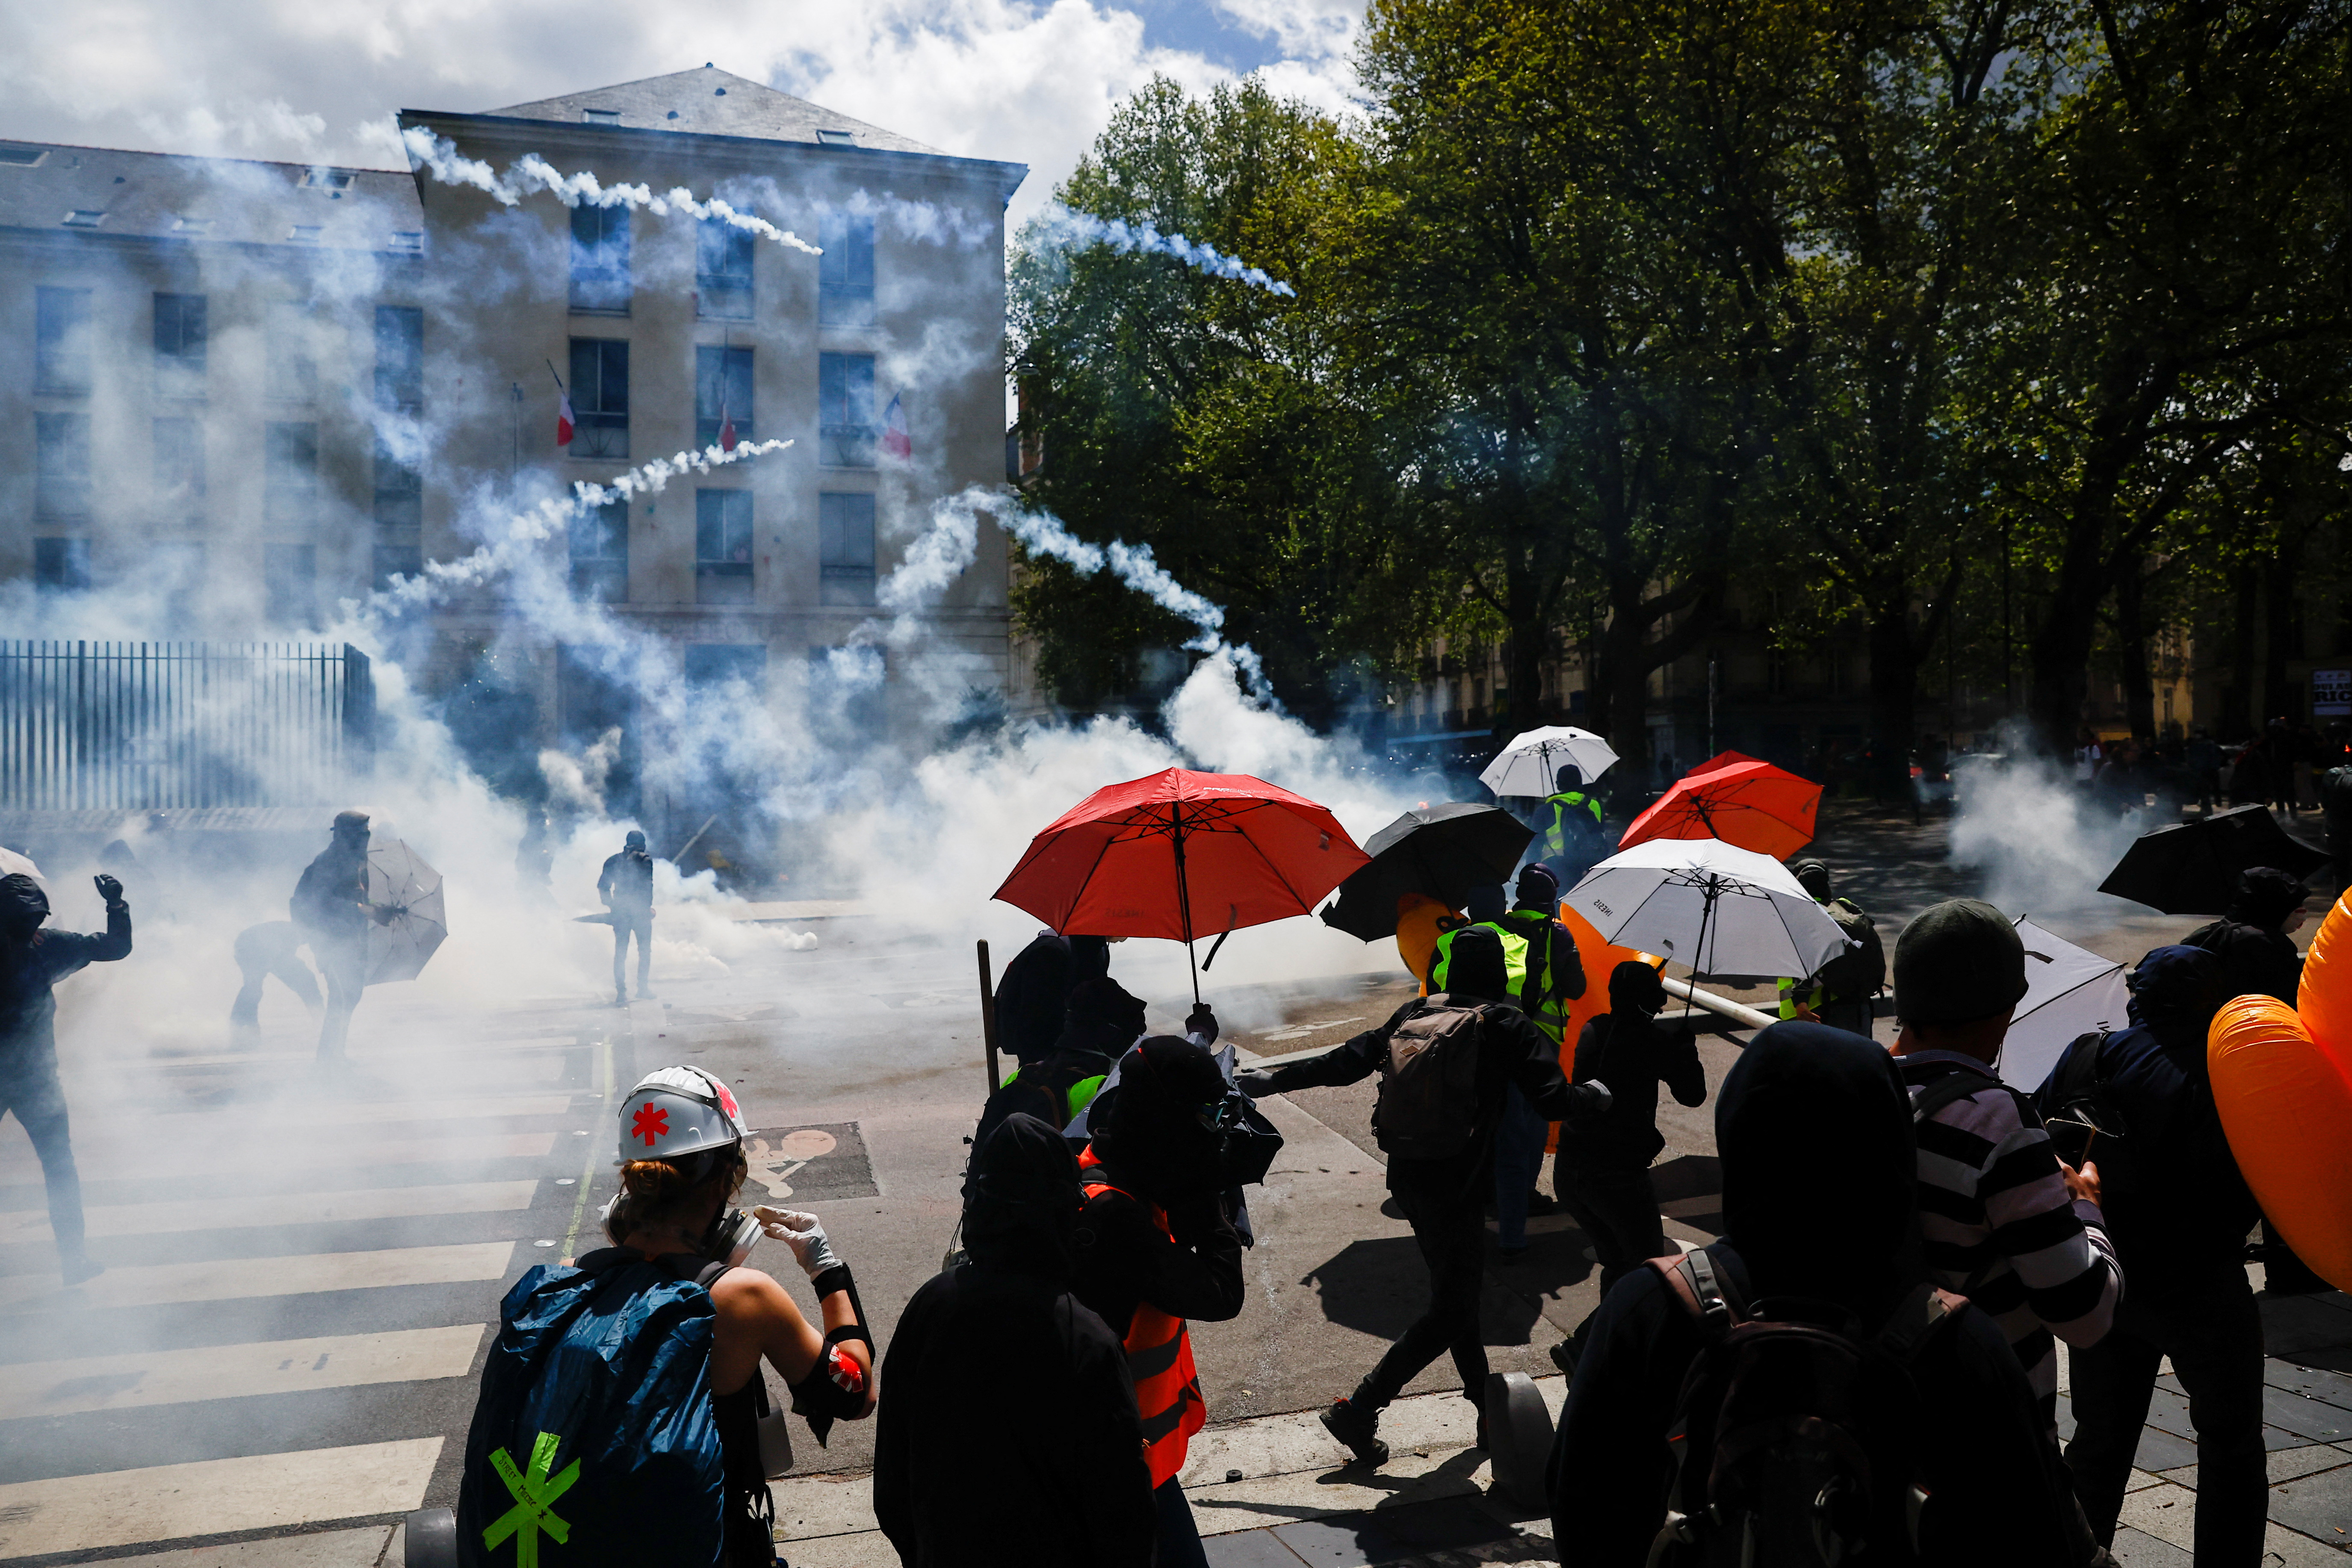 Demonstrators protect themselves with umbrellas amid tear gas during the traditional May Day labour march, a day of mobilisation against the French pension reform law and for social justice, in Nantes, France May 1, 2023. REUTERS/Stephane Mahe